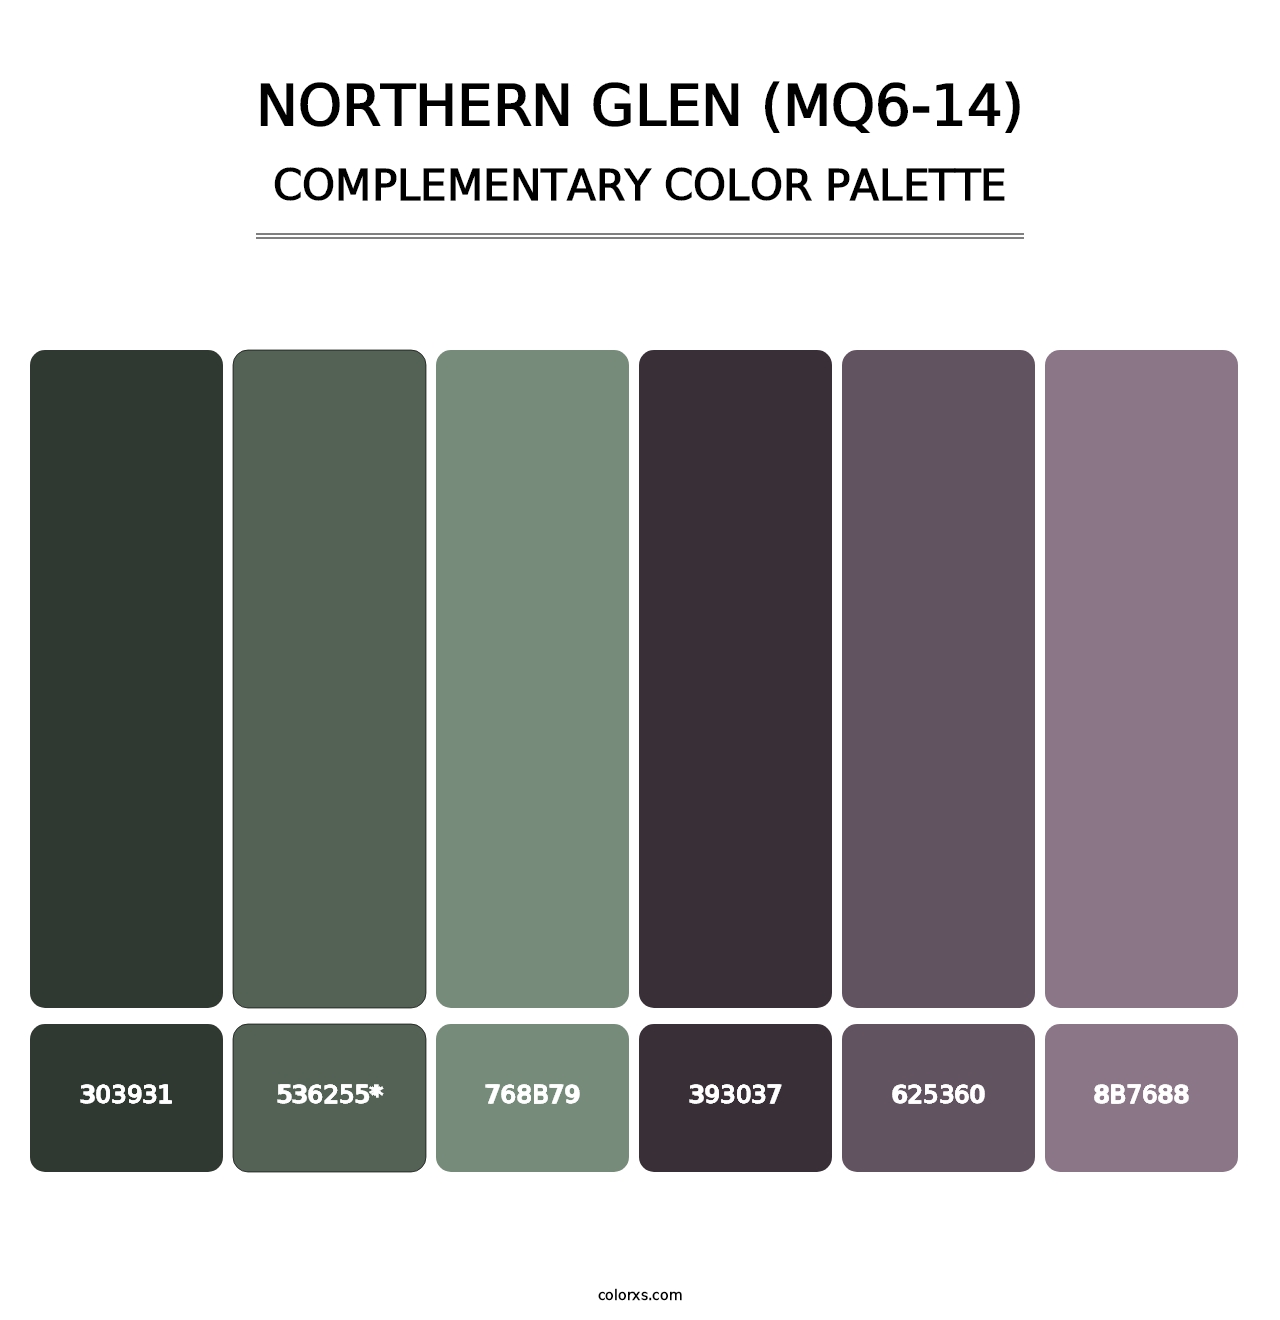 Northern Glen (MQ6-14) - Complementary Color Palette